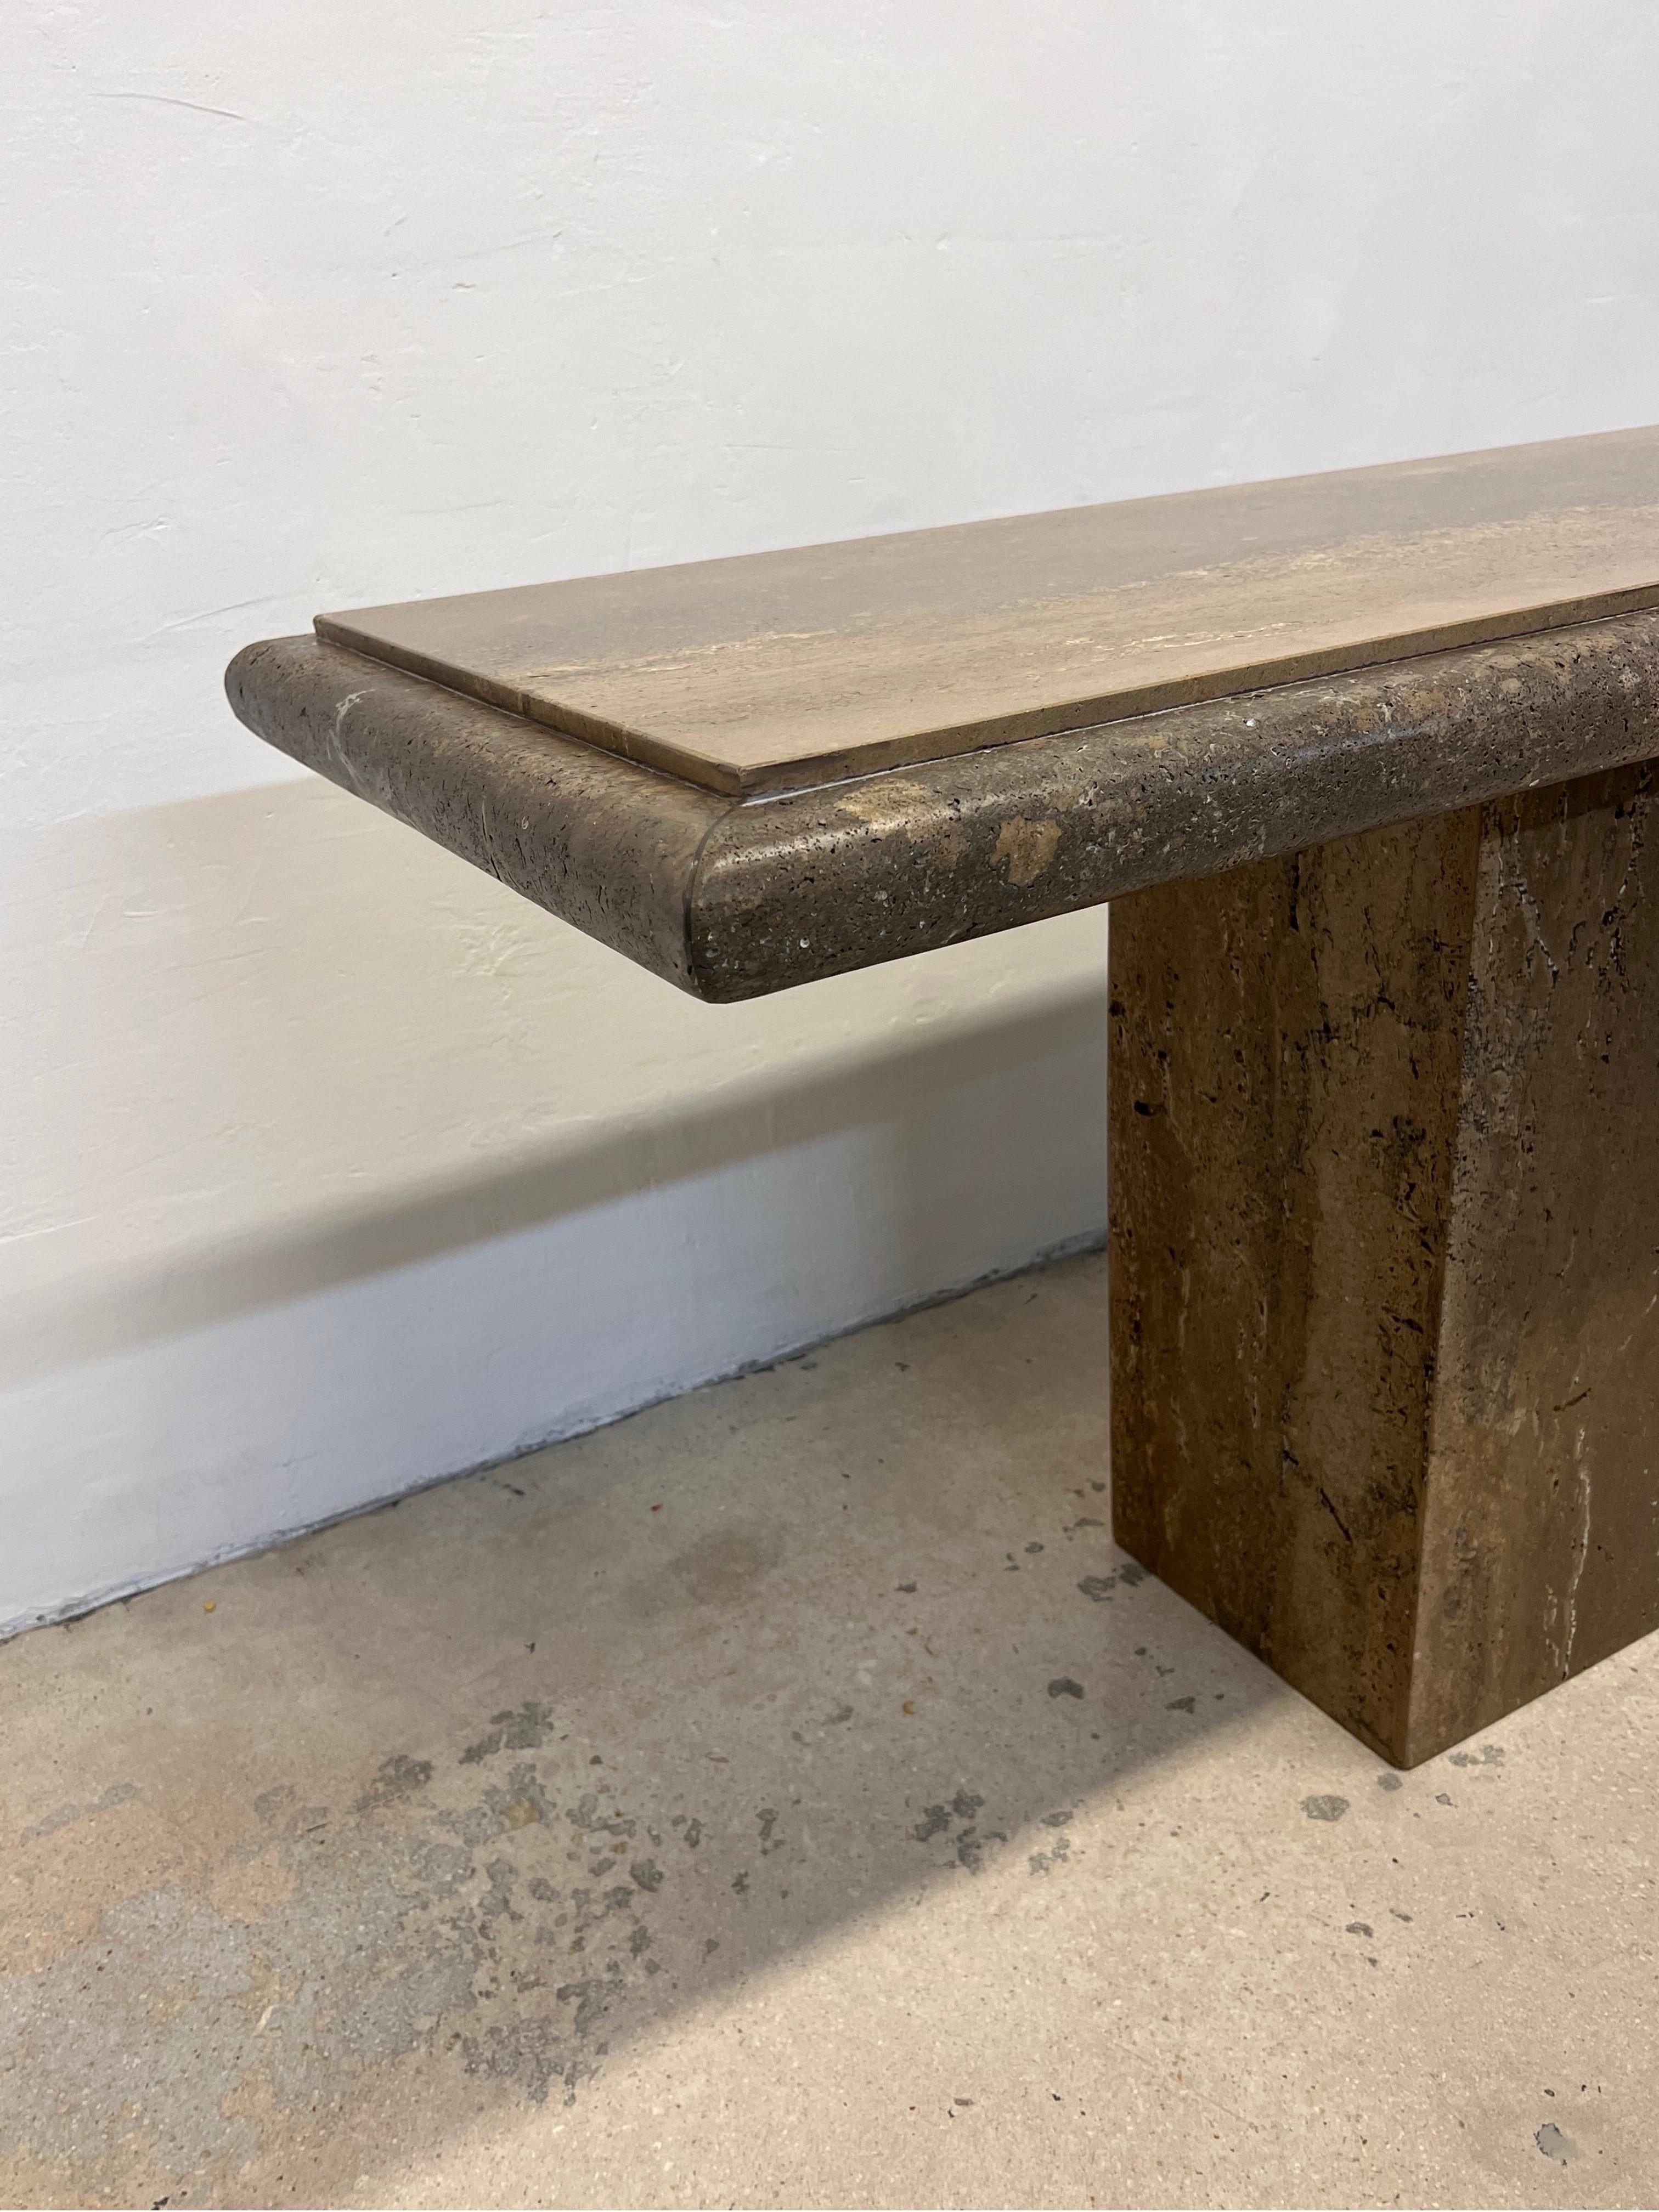 Polished Italian Travertine Bullnose Console Table, Italy 1970s For Sale 1